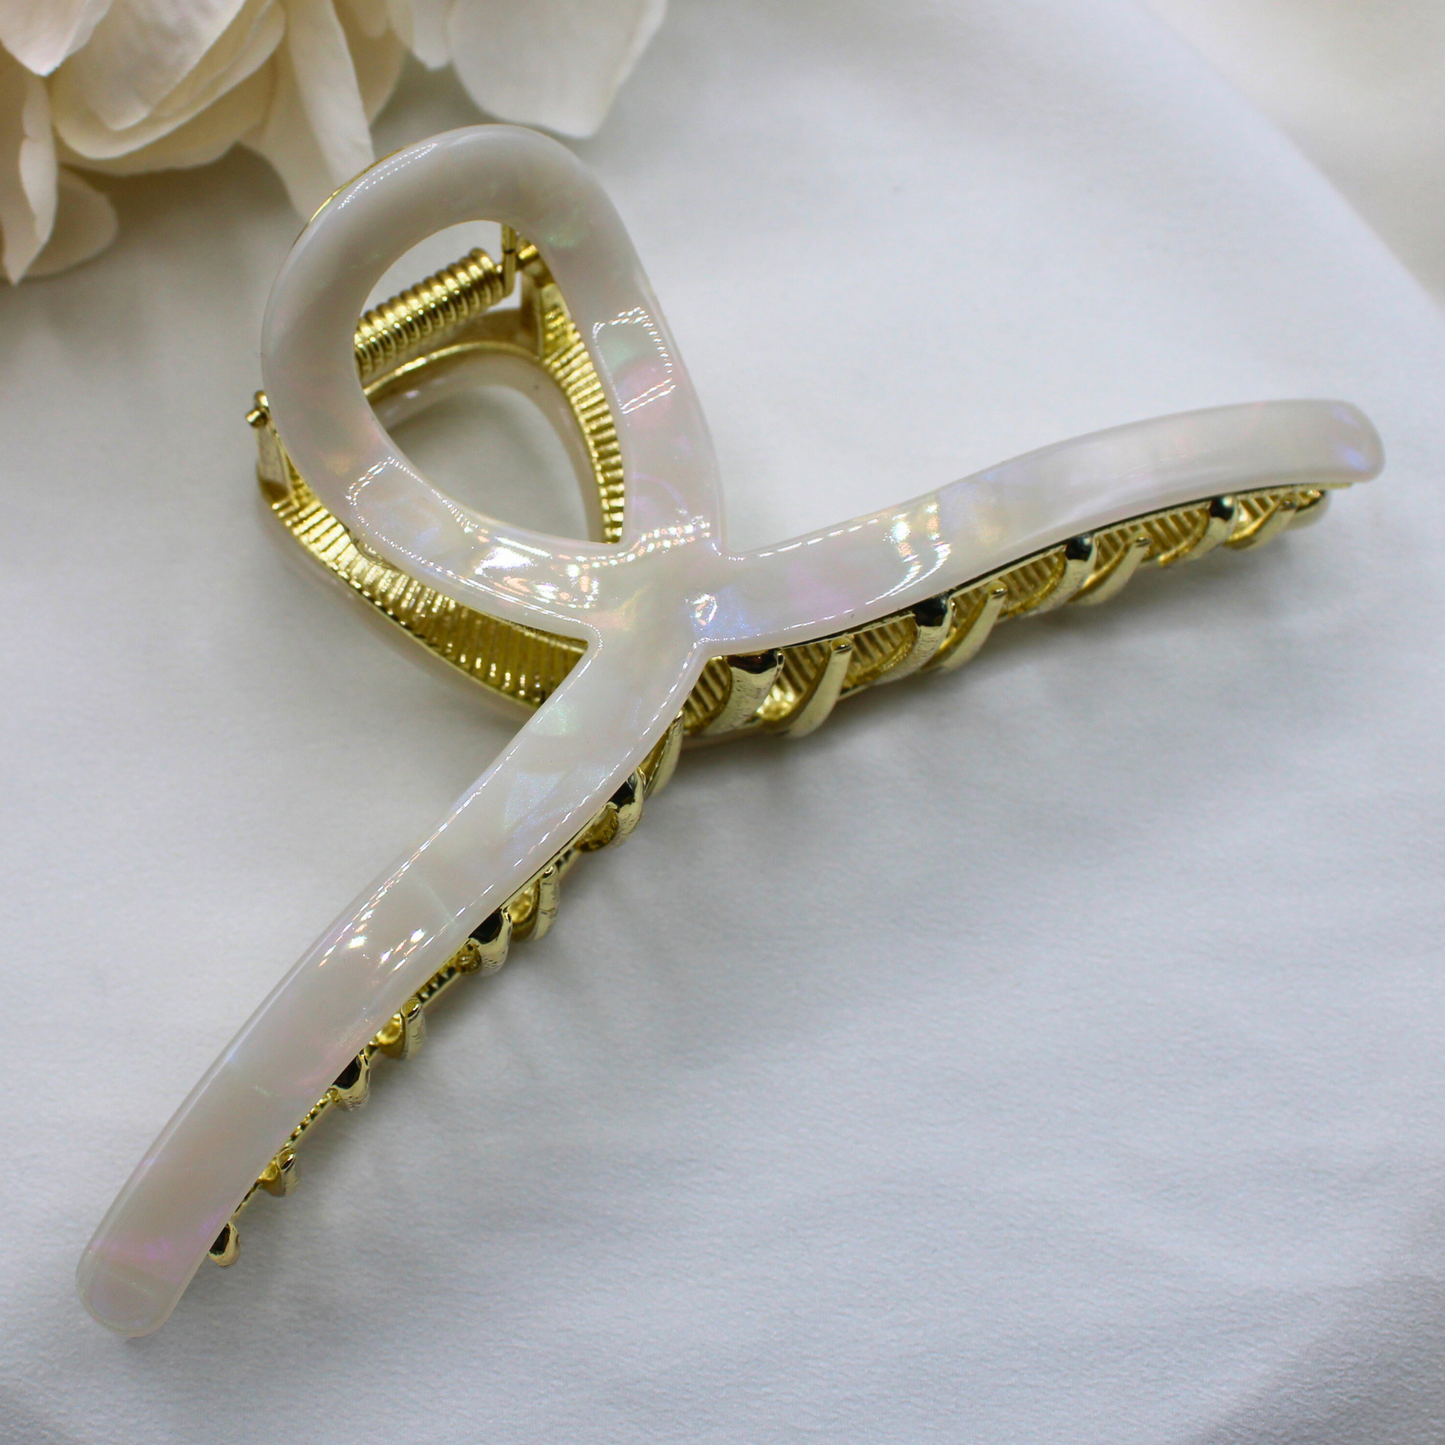 Aya Cellulose Acetate and Metal Hair Claw Clips